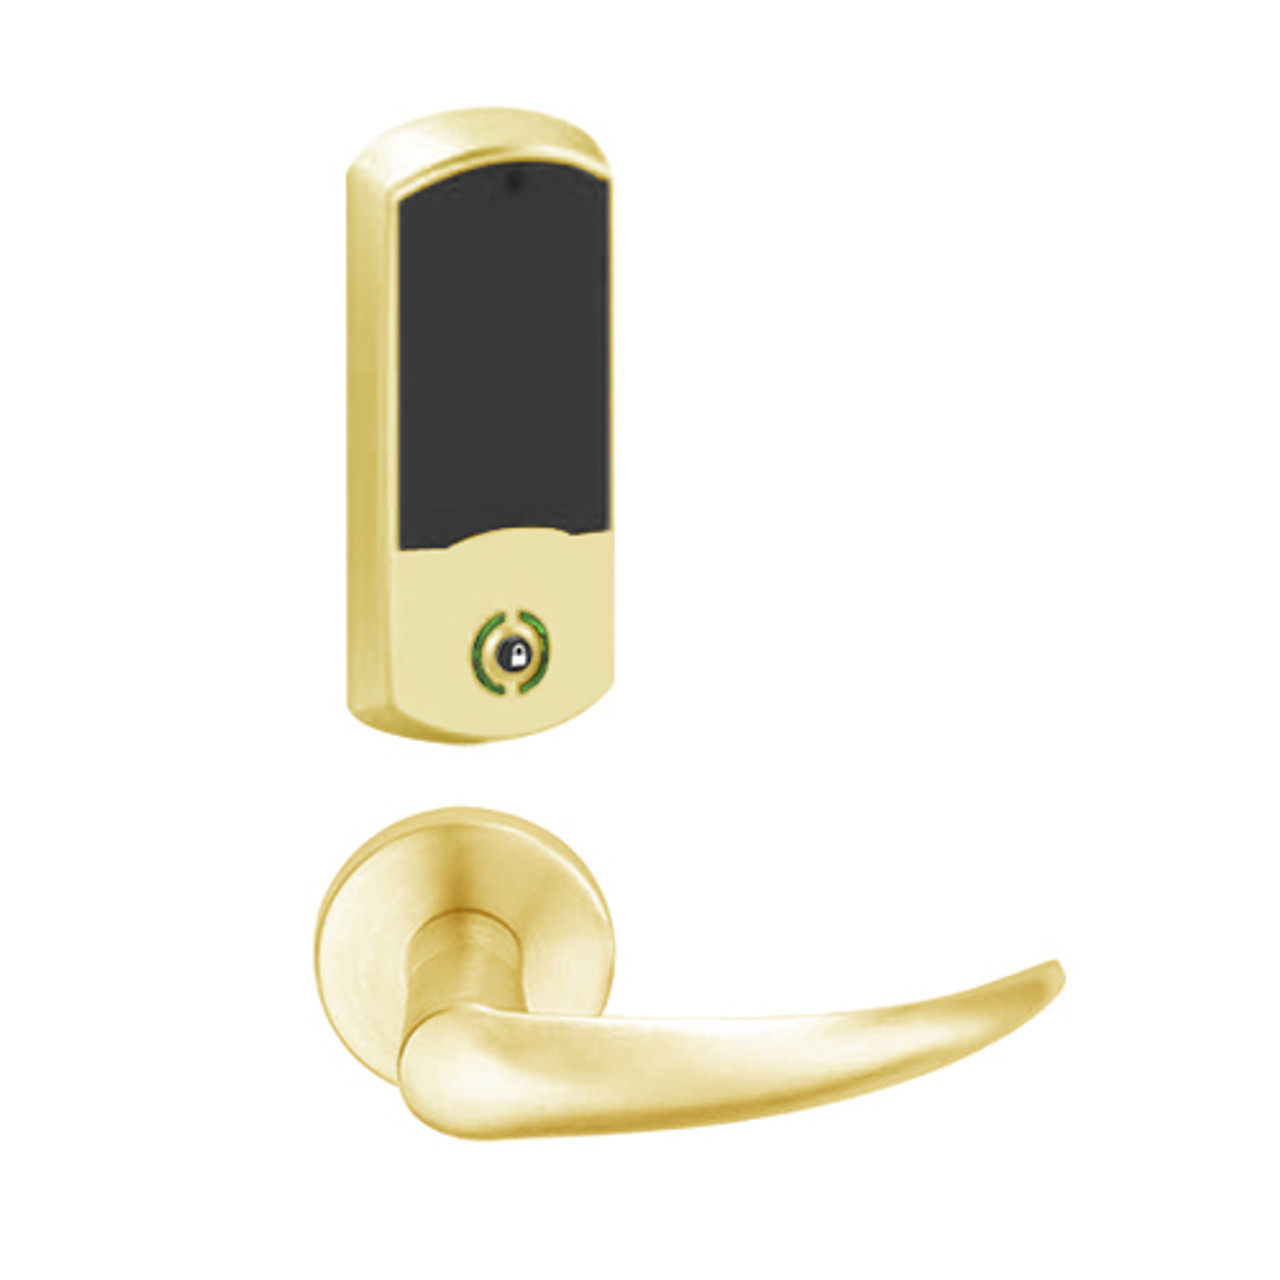 LEMB-GRW-P-OME-605-00C Schlage Privacy/Office Wireless Greenwich Mortise Lock with LED Indicator and Omega Lever in Bright Brass